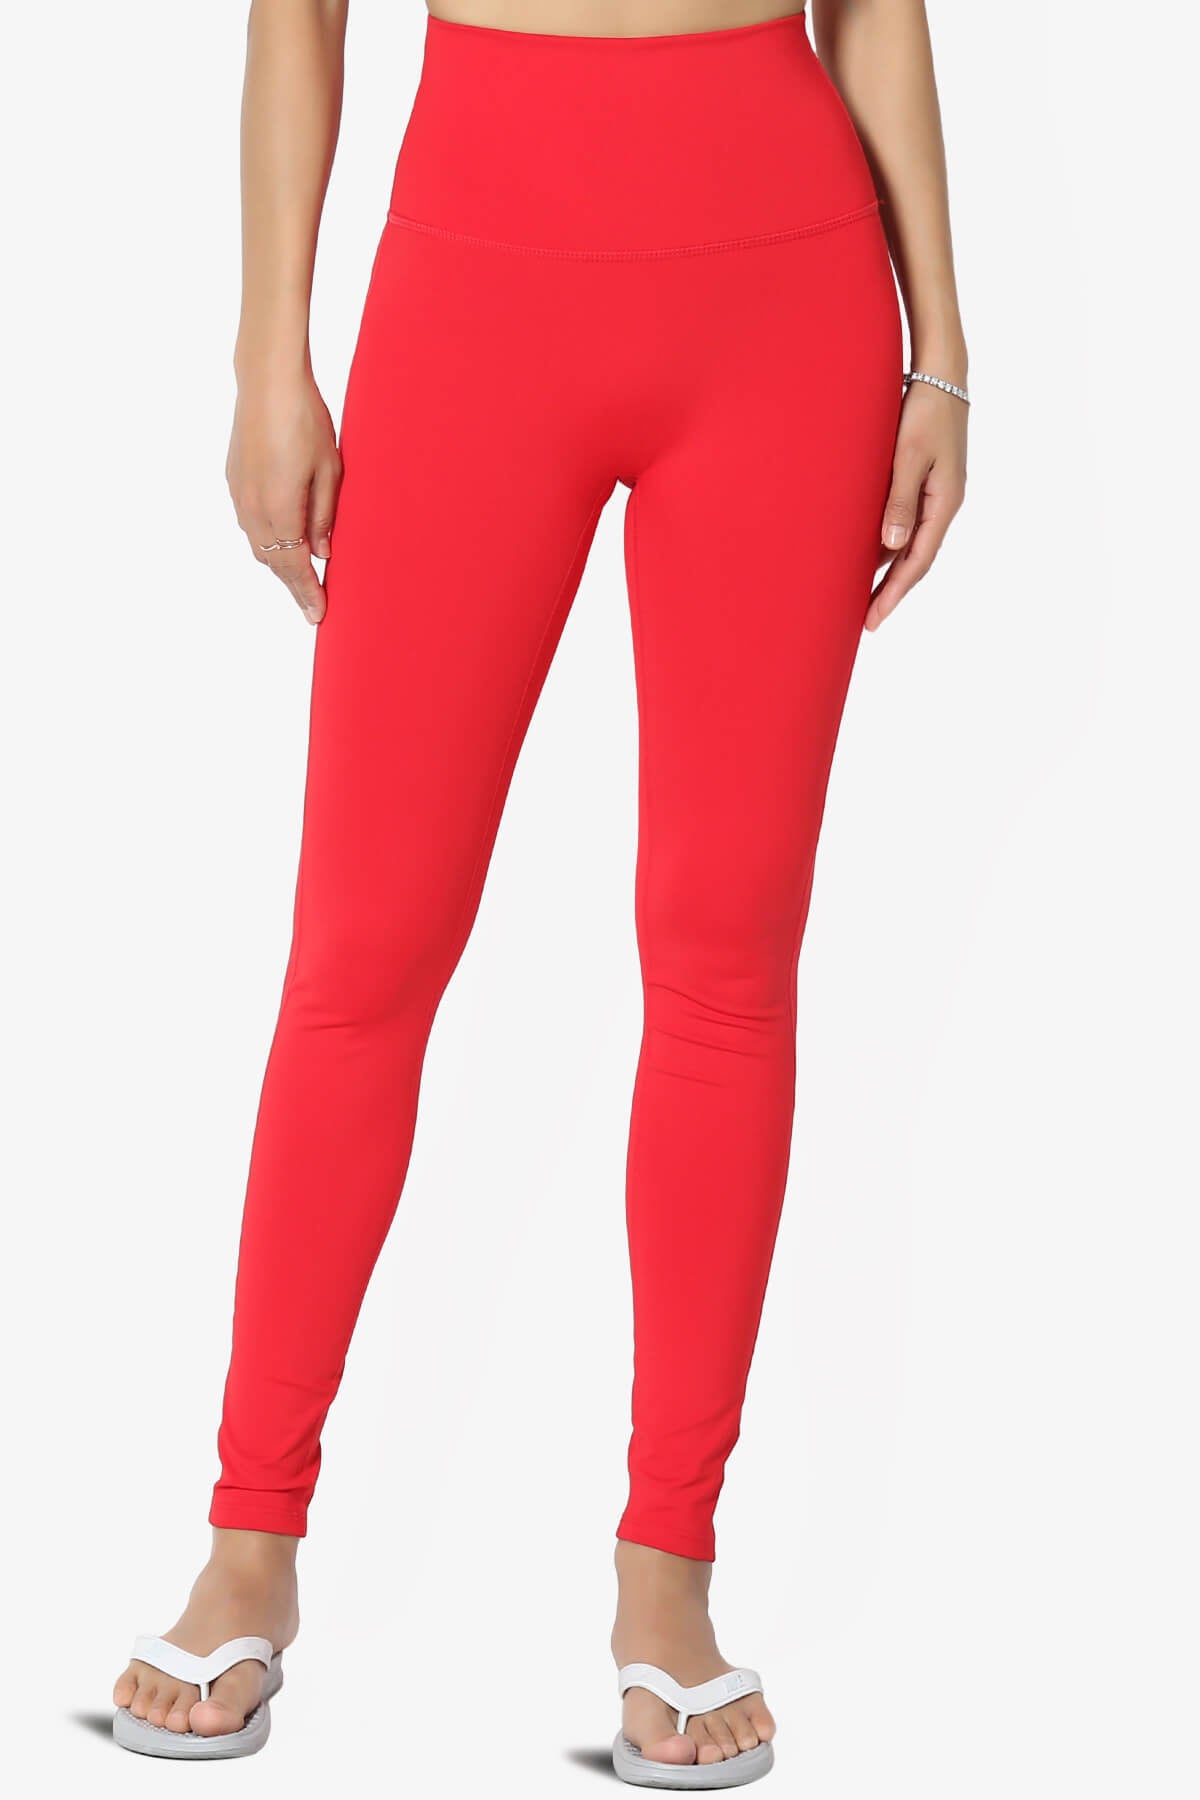 Mosco Athletic High Rise Ankle Leggings RED_2